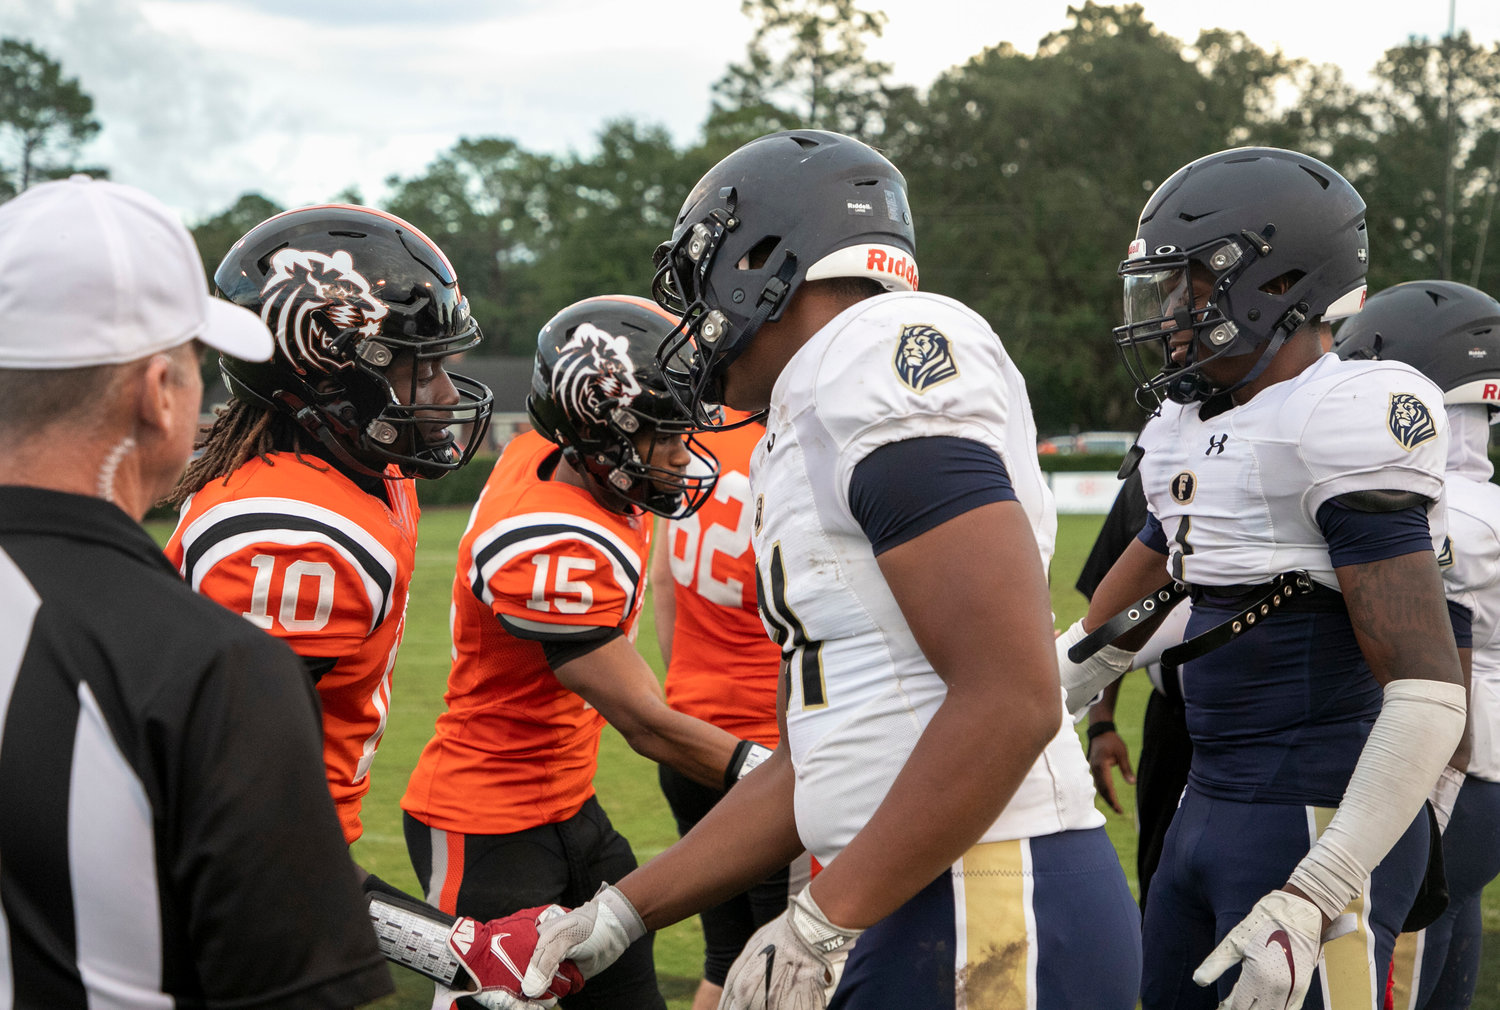 AJ Prim (31) and the Foley captains meet the Baldwin County Tigers’ captains ahead of the non-region game at Lyle Underwood Stadium in Bay Minette Aug. 26. Prim was named one of two Lion representatives recently selected to the AHSAA All-Star roster.